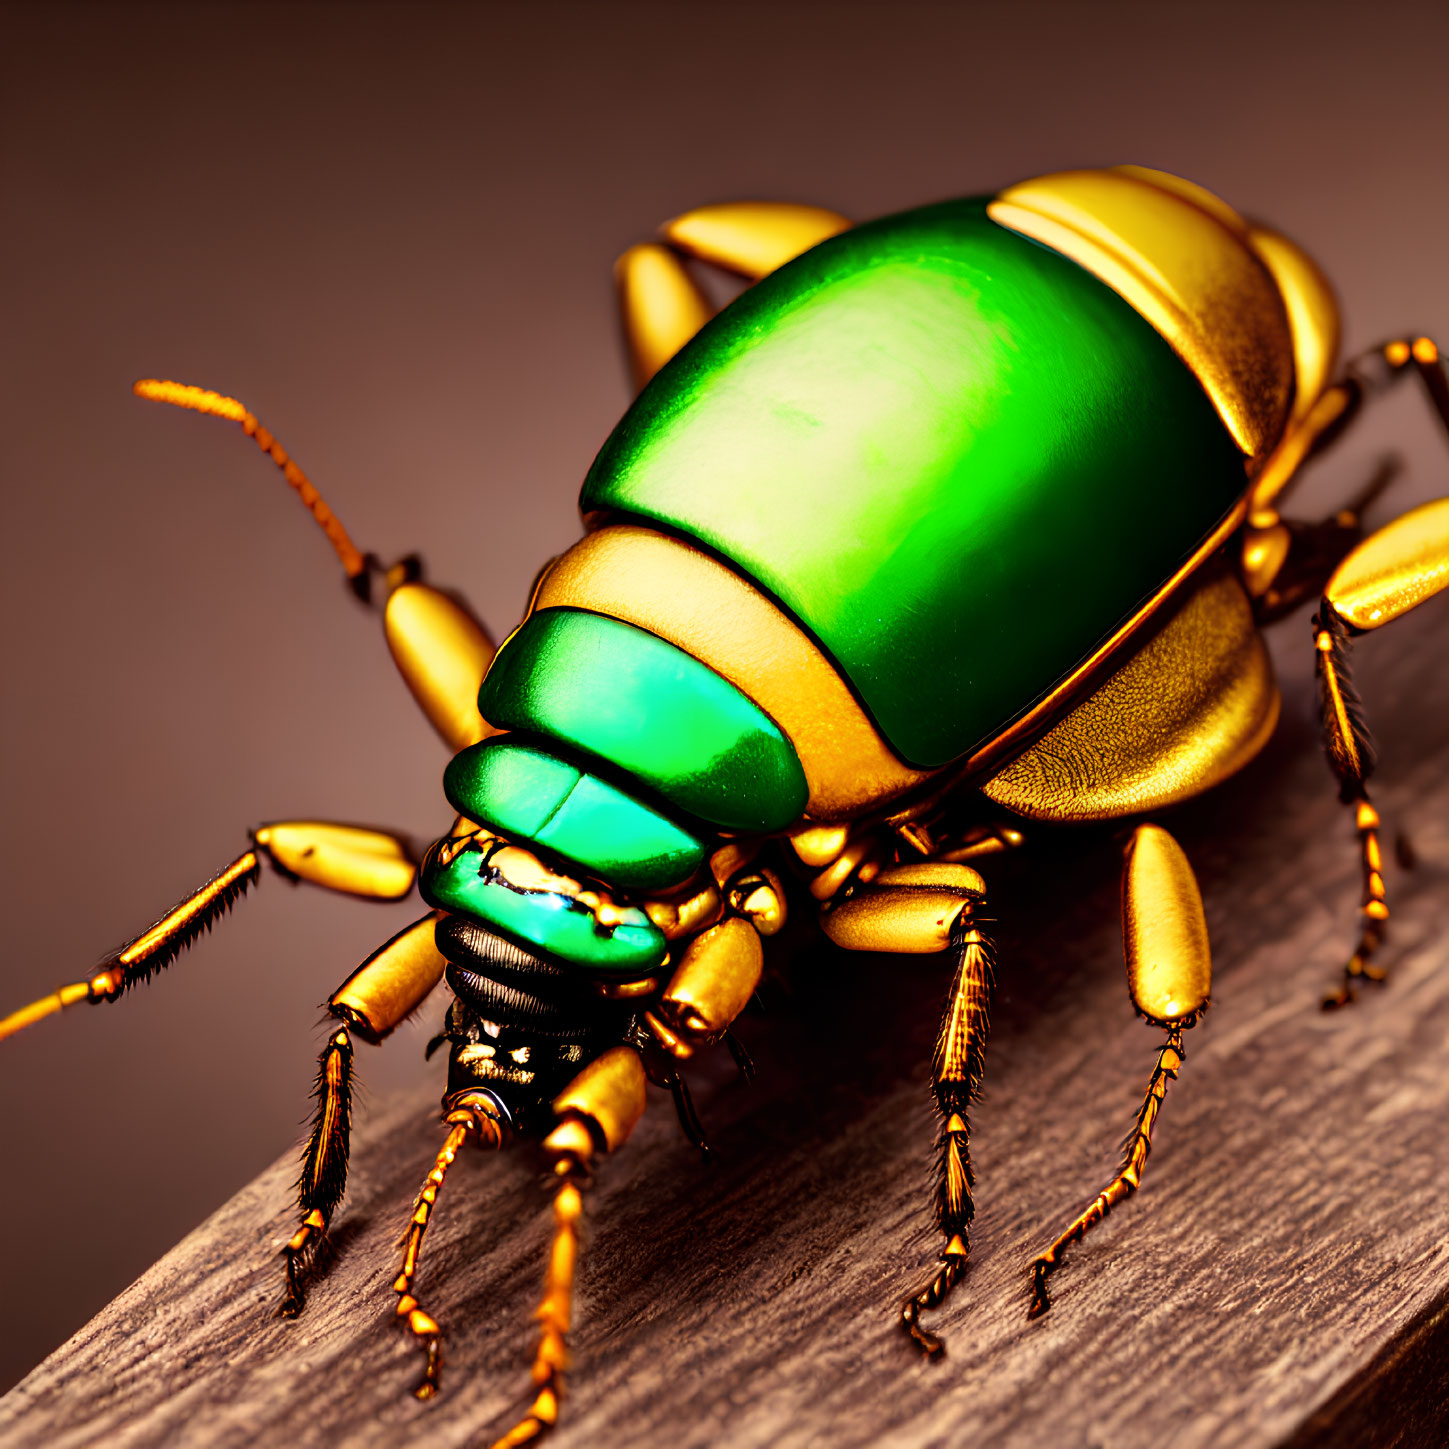 Detailed Close-Up of Vibrant Green Beetle on Wooden Surface